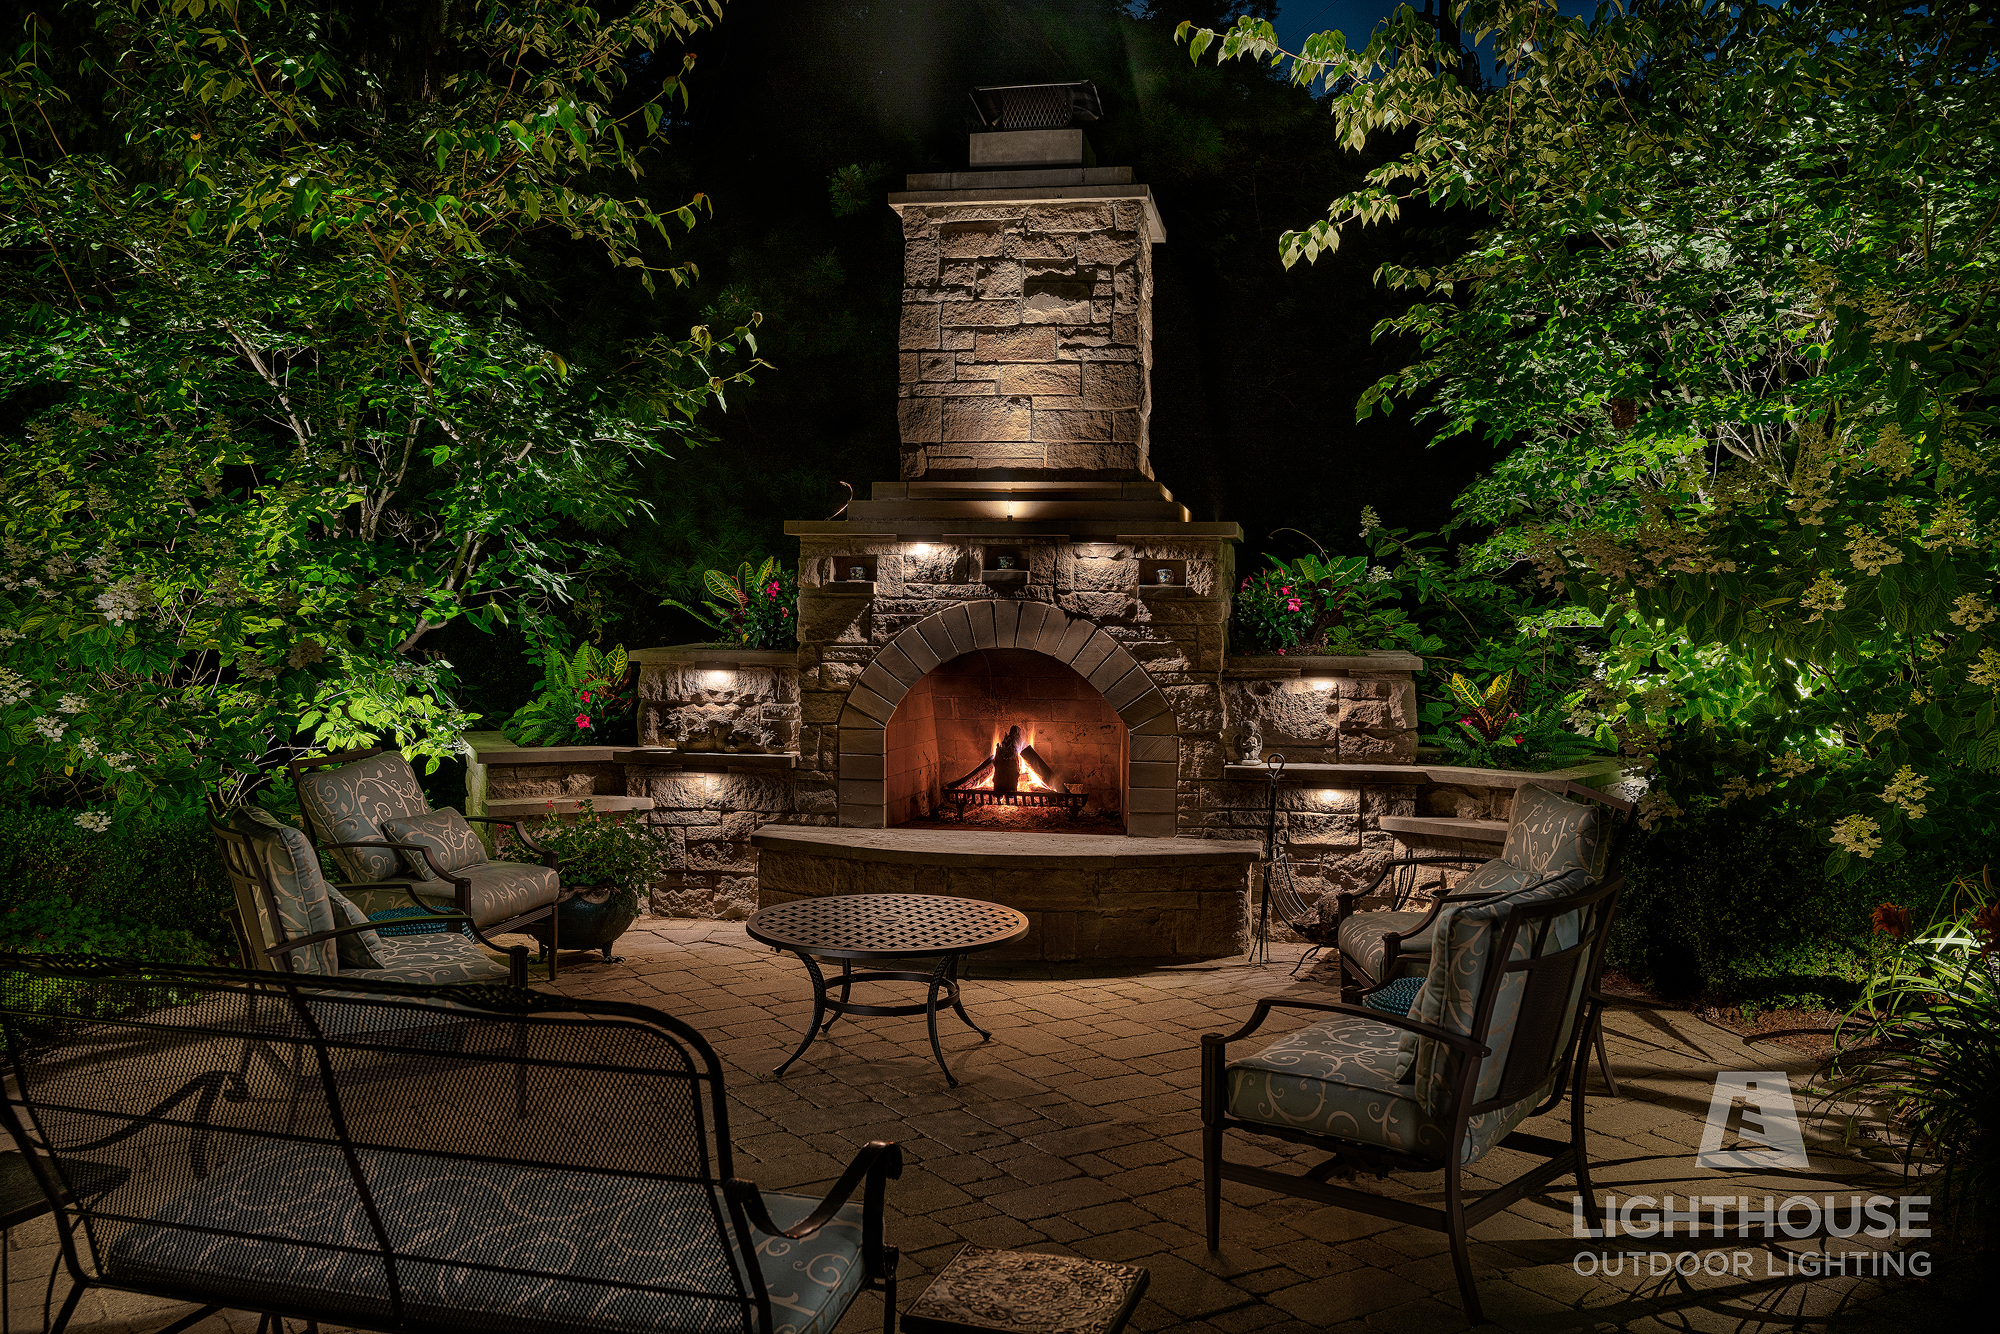 Landscape Lighting Professional in North Reading